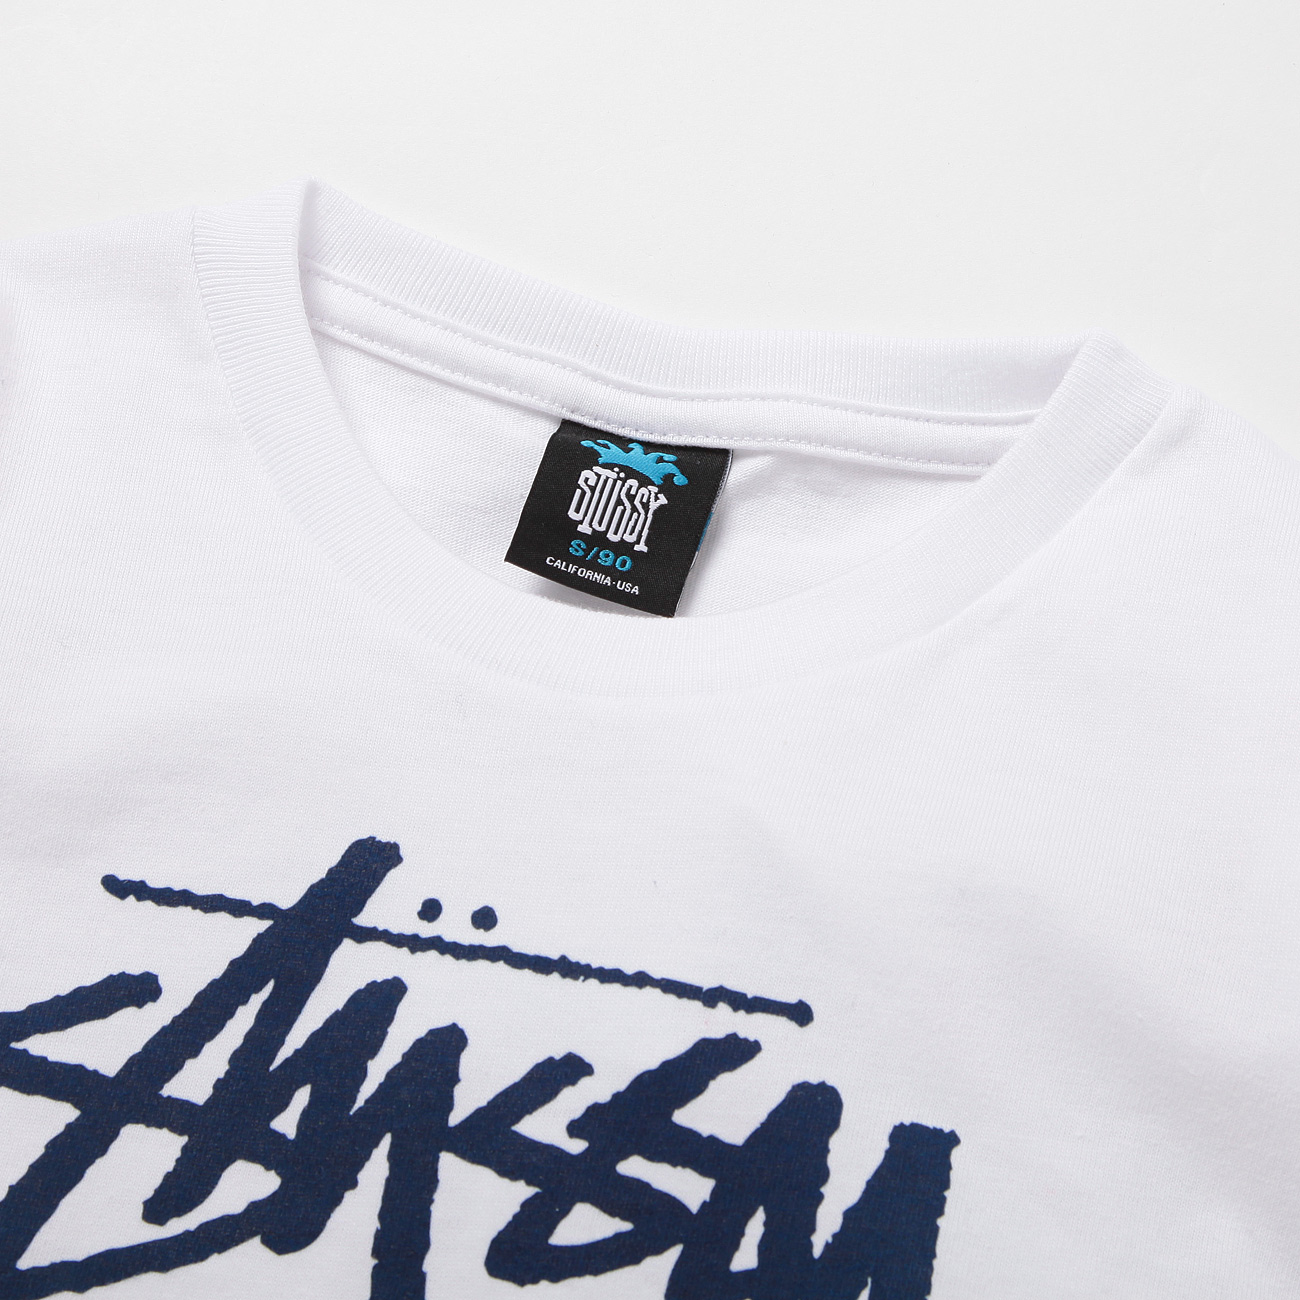 STUSSY KIDS ステューシー キッズ Kids Stock Link L/SL Tee White 通販 正規取扱店  COLLECT STORE コレクトストア